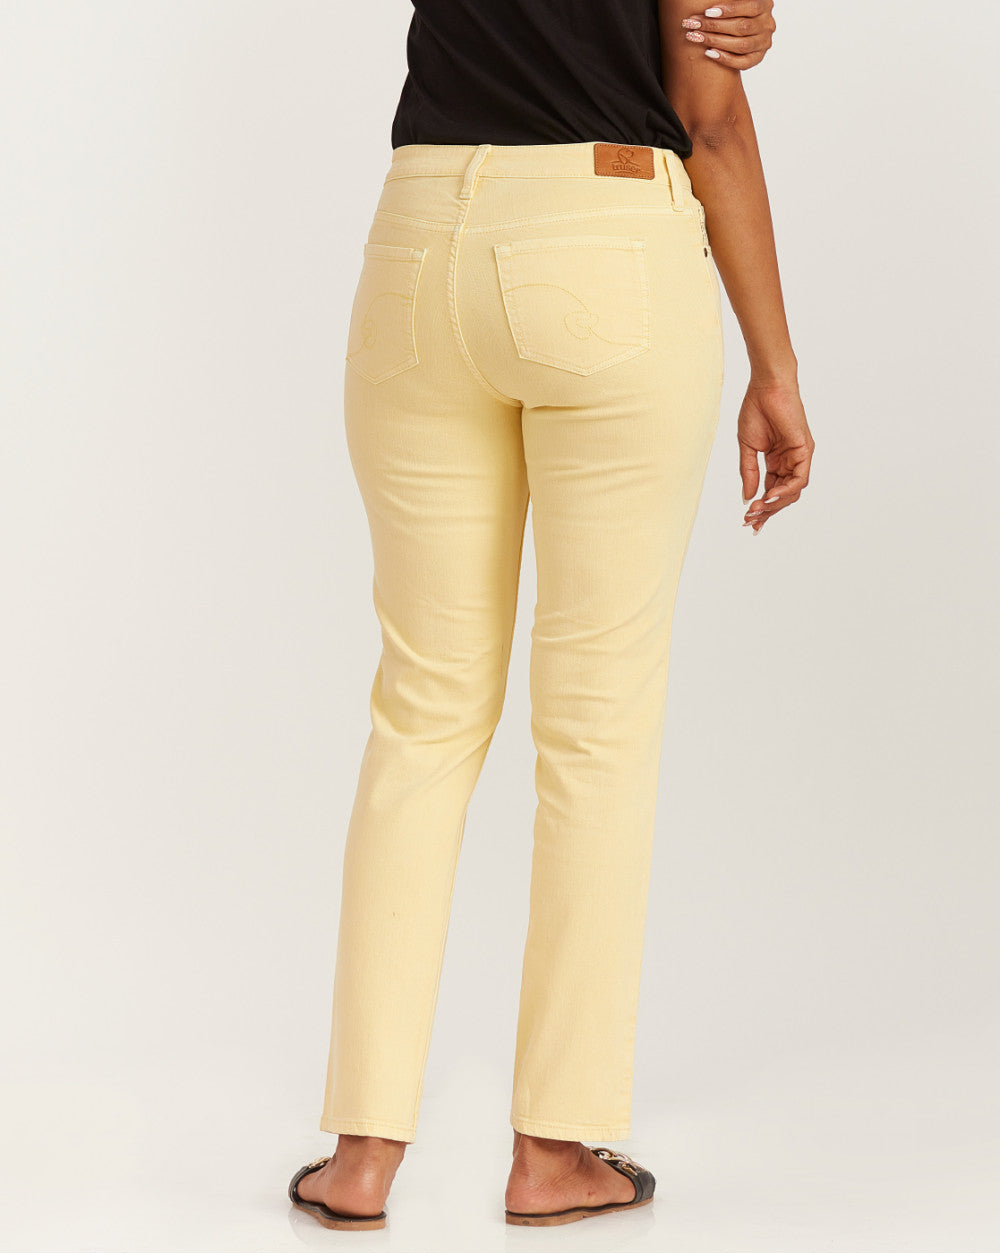 Slim Fit Mid Waist Colored Jeans - Daffodil Yellow